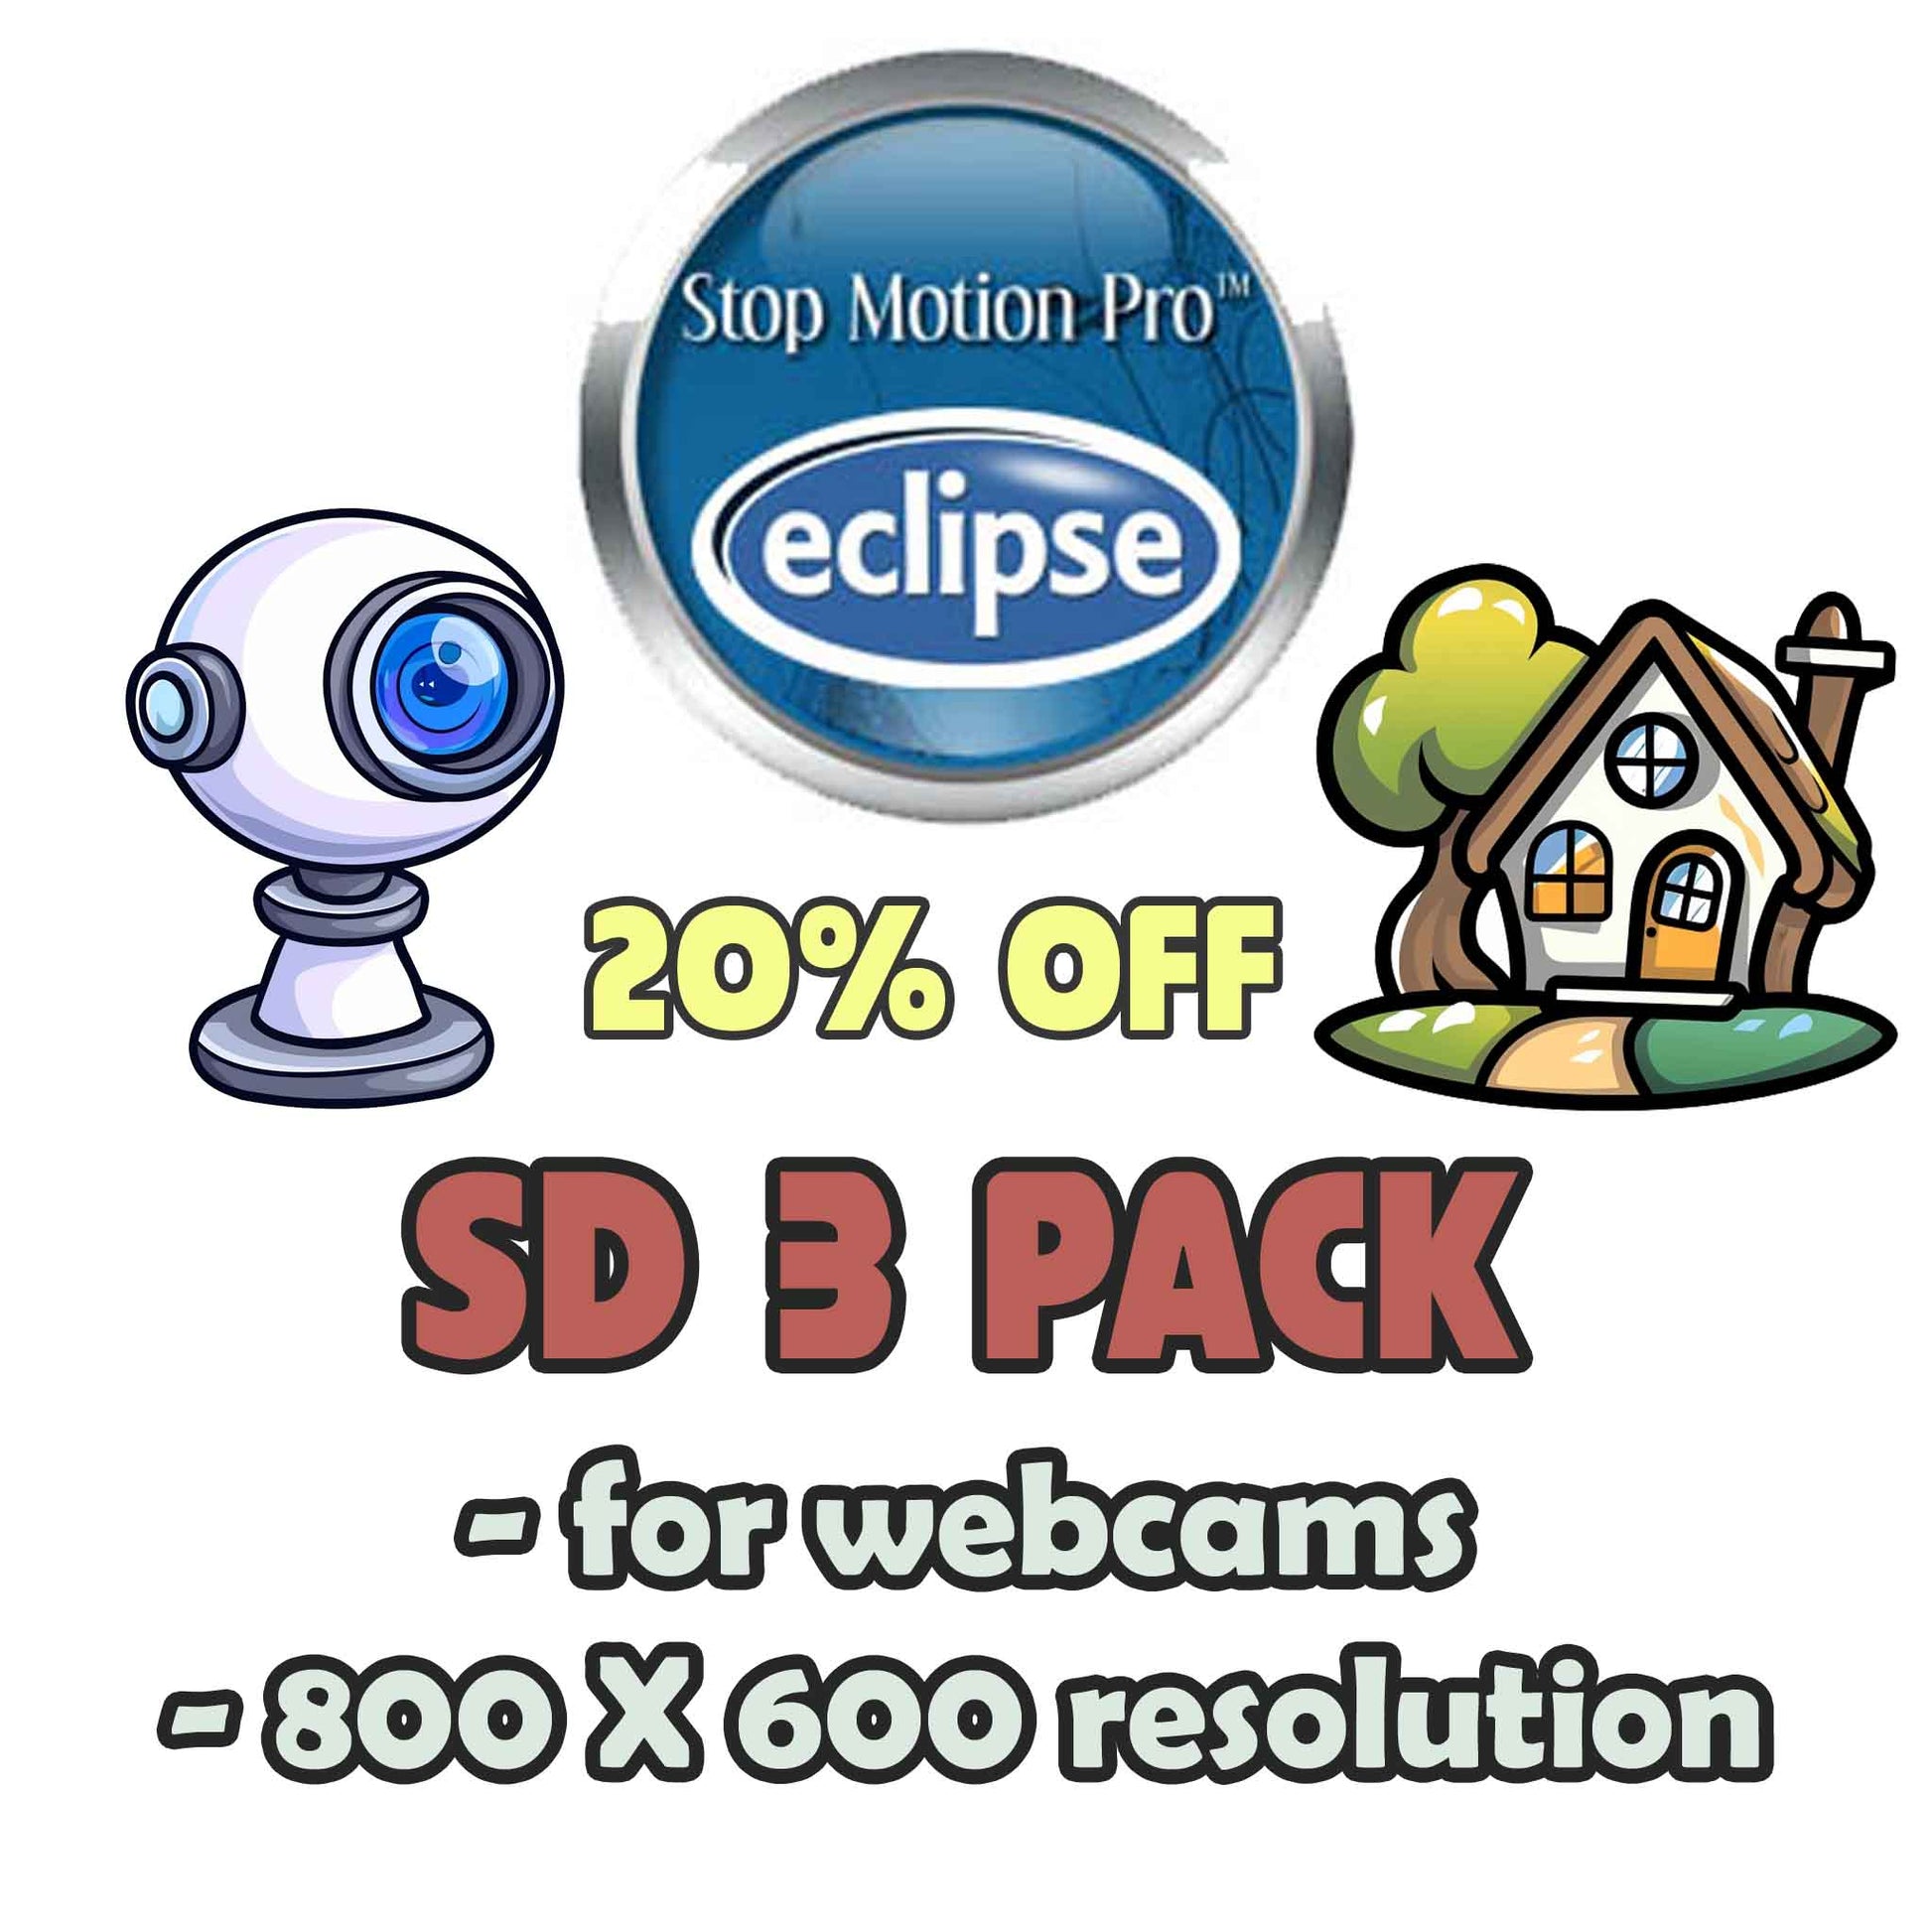 Stop Motion Pro Eclipse SD 3 Pack License